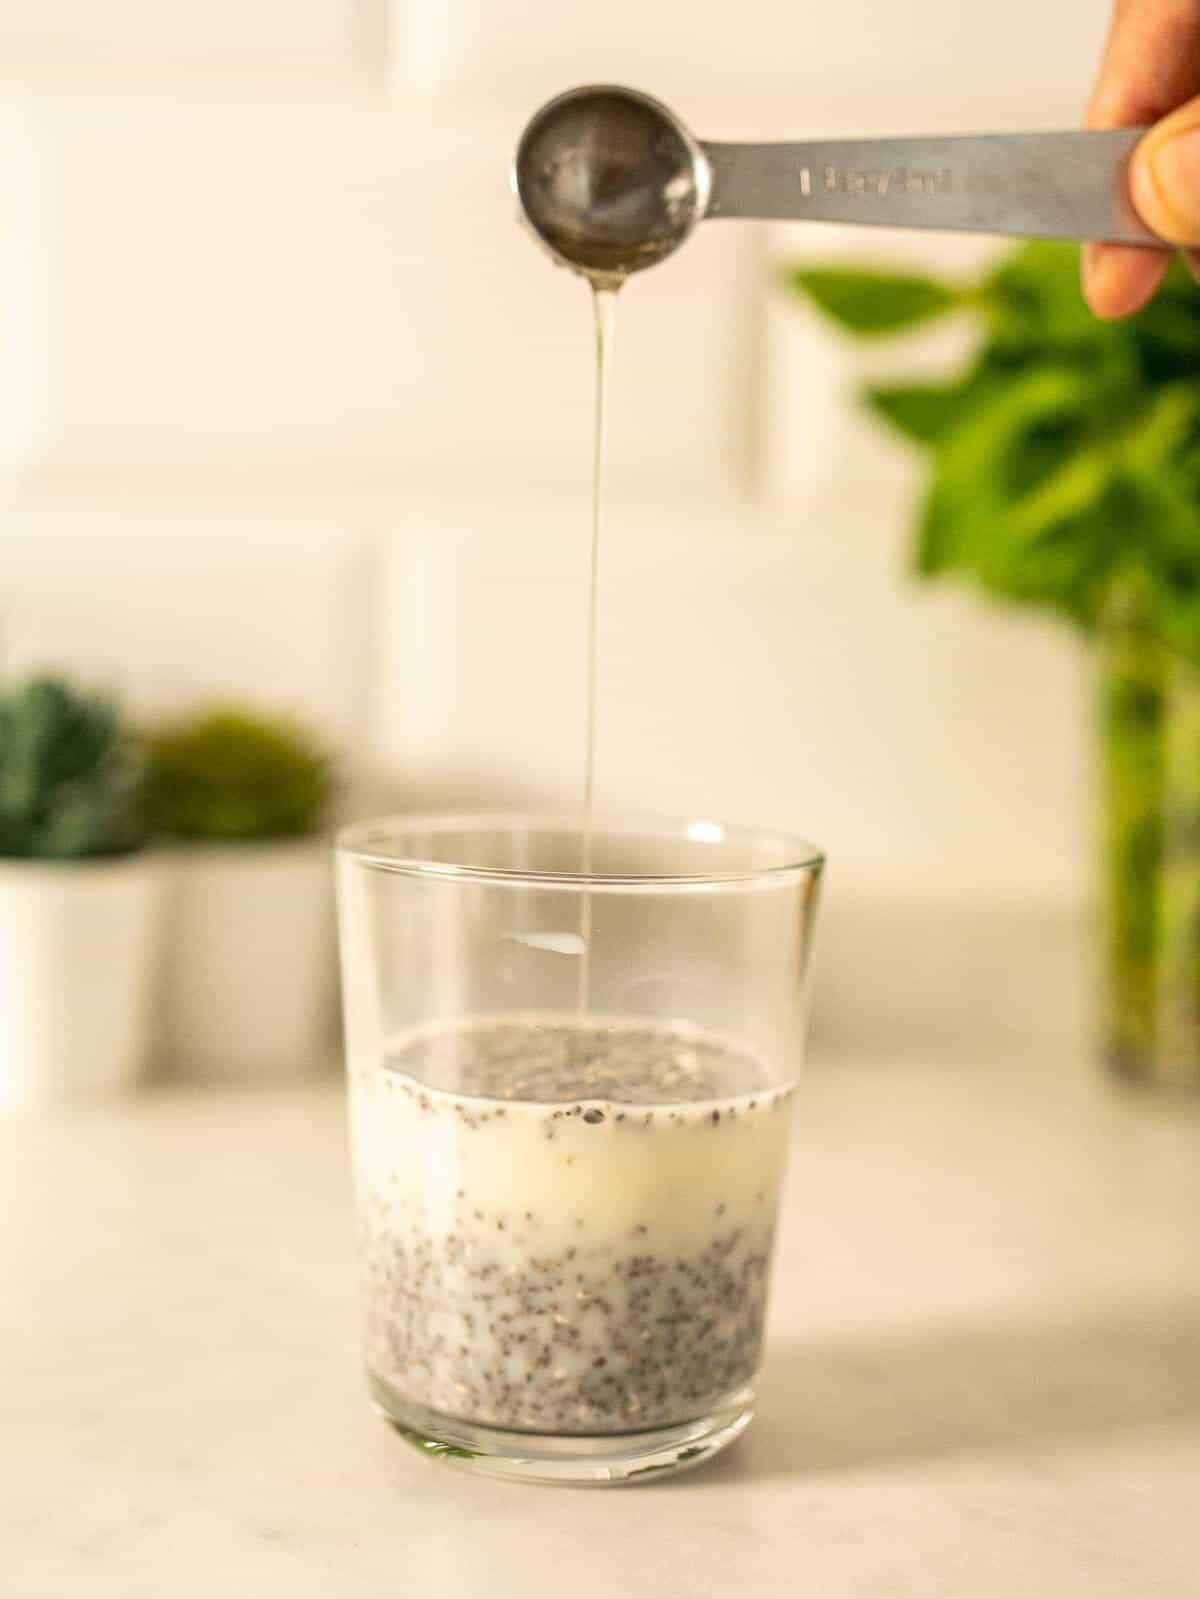 adding measured sweetener into a glass.